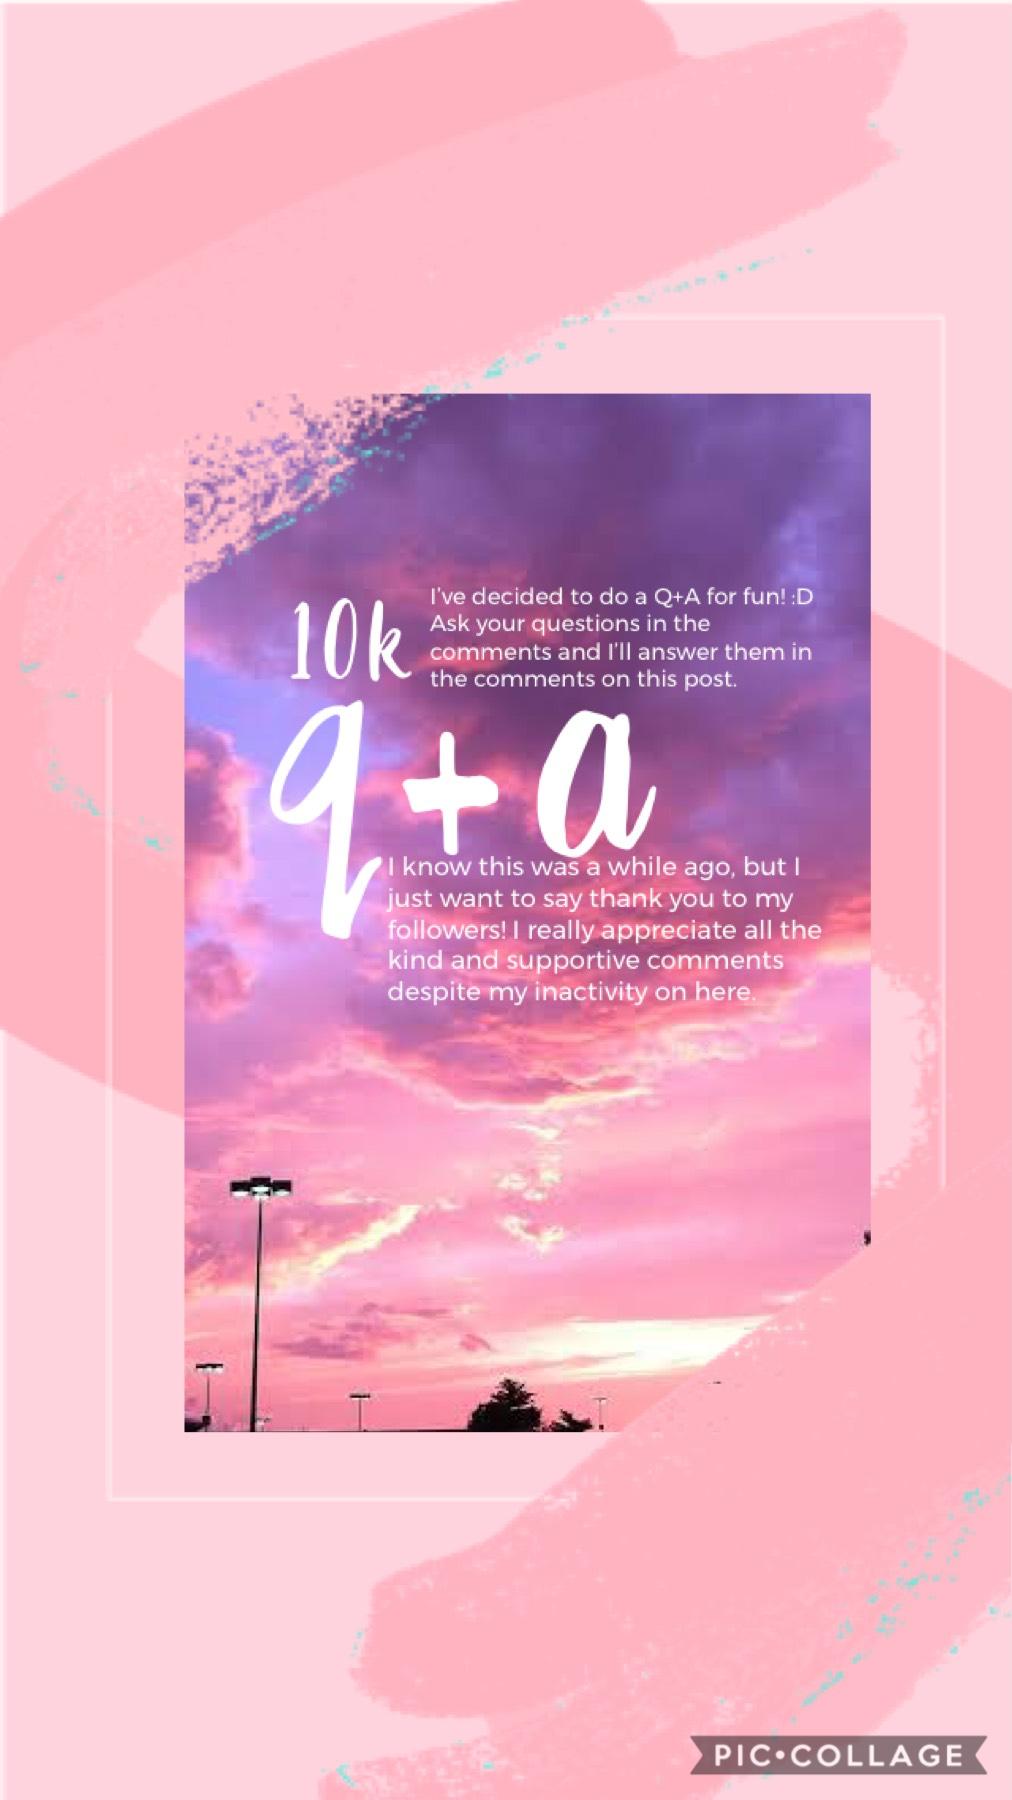 A q+a in celebration of 10k! (o^^o) Needless to say, I won’t be answering anything too personal so don’t bother with those kinds of questions. Also, remember to check back after you comment to see my answers! And feel free to give your own answers for the